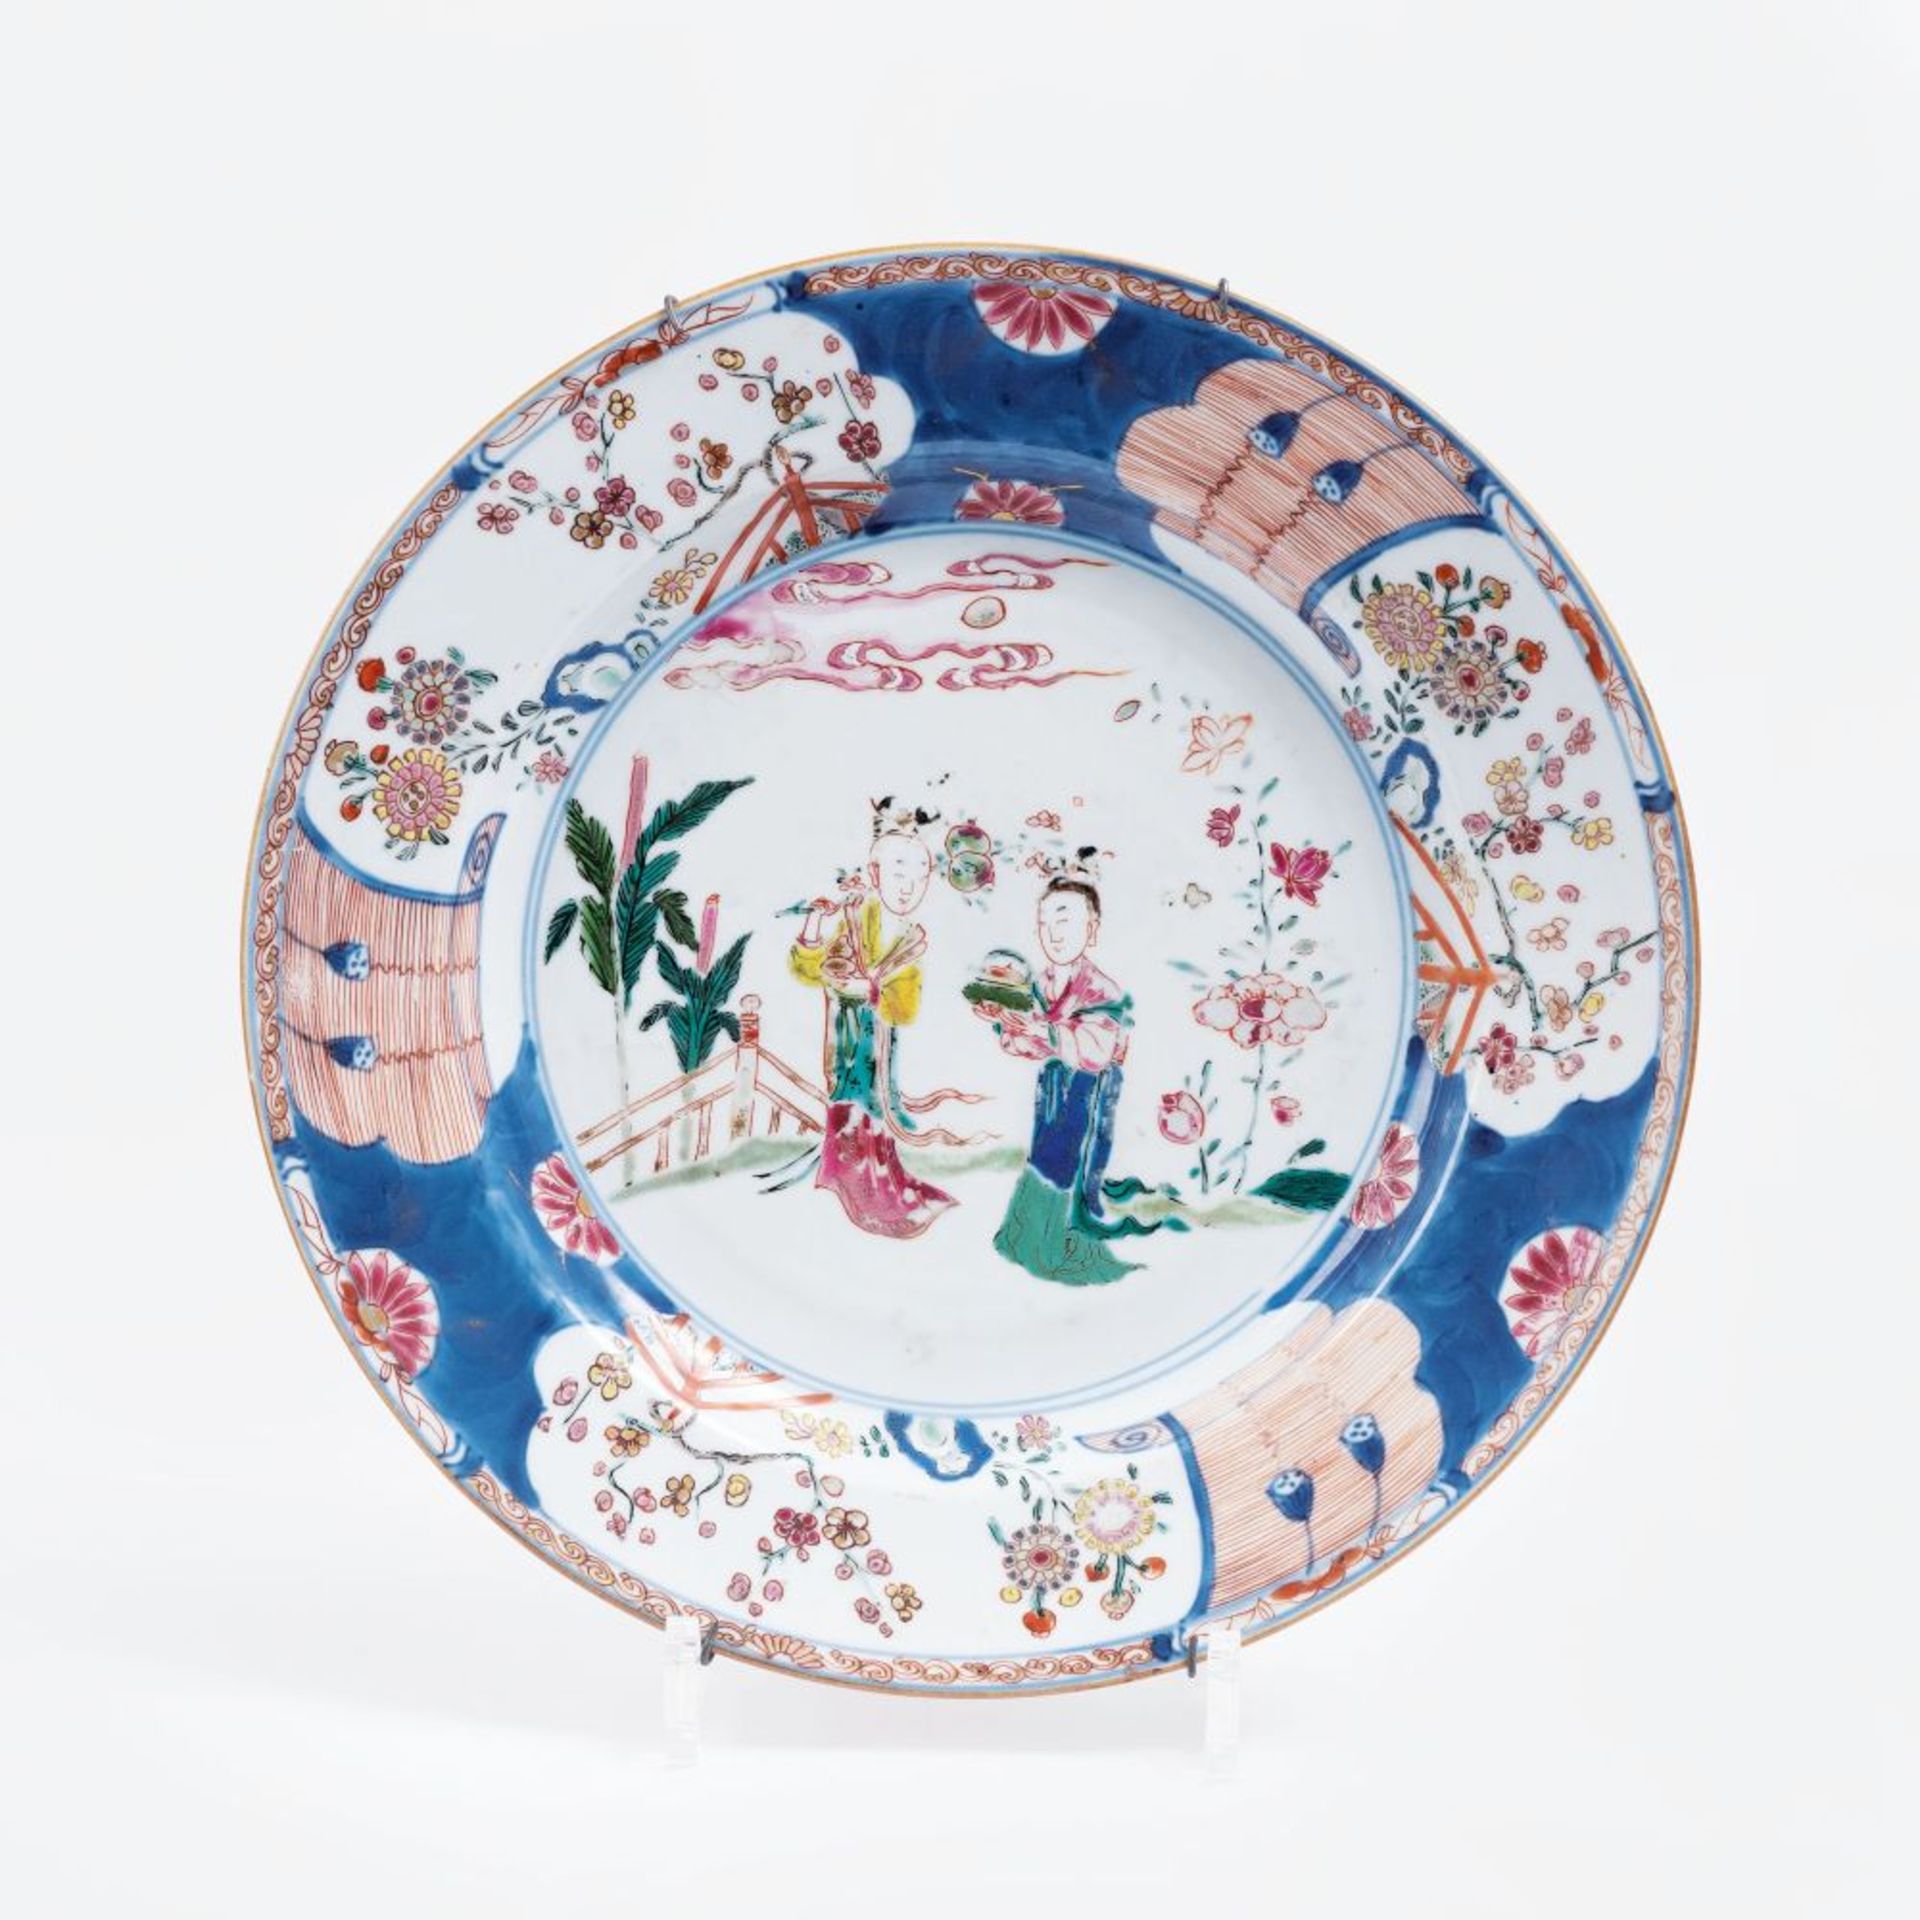 A Plate with Garden Scene.